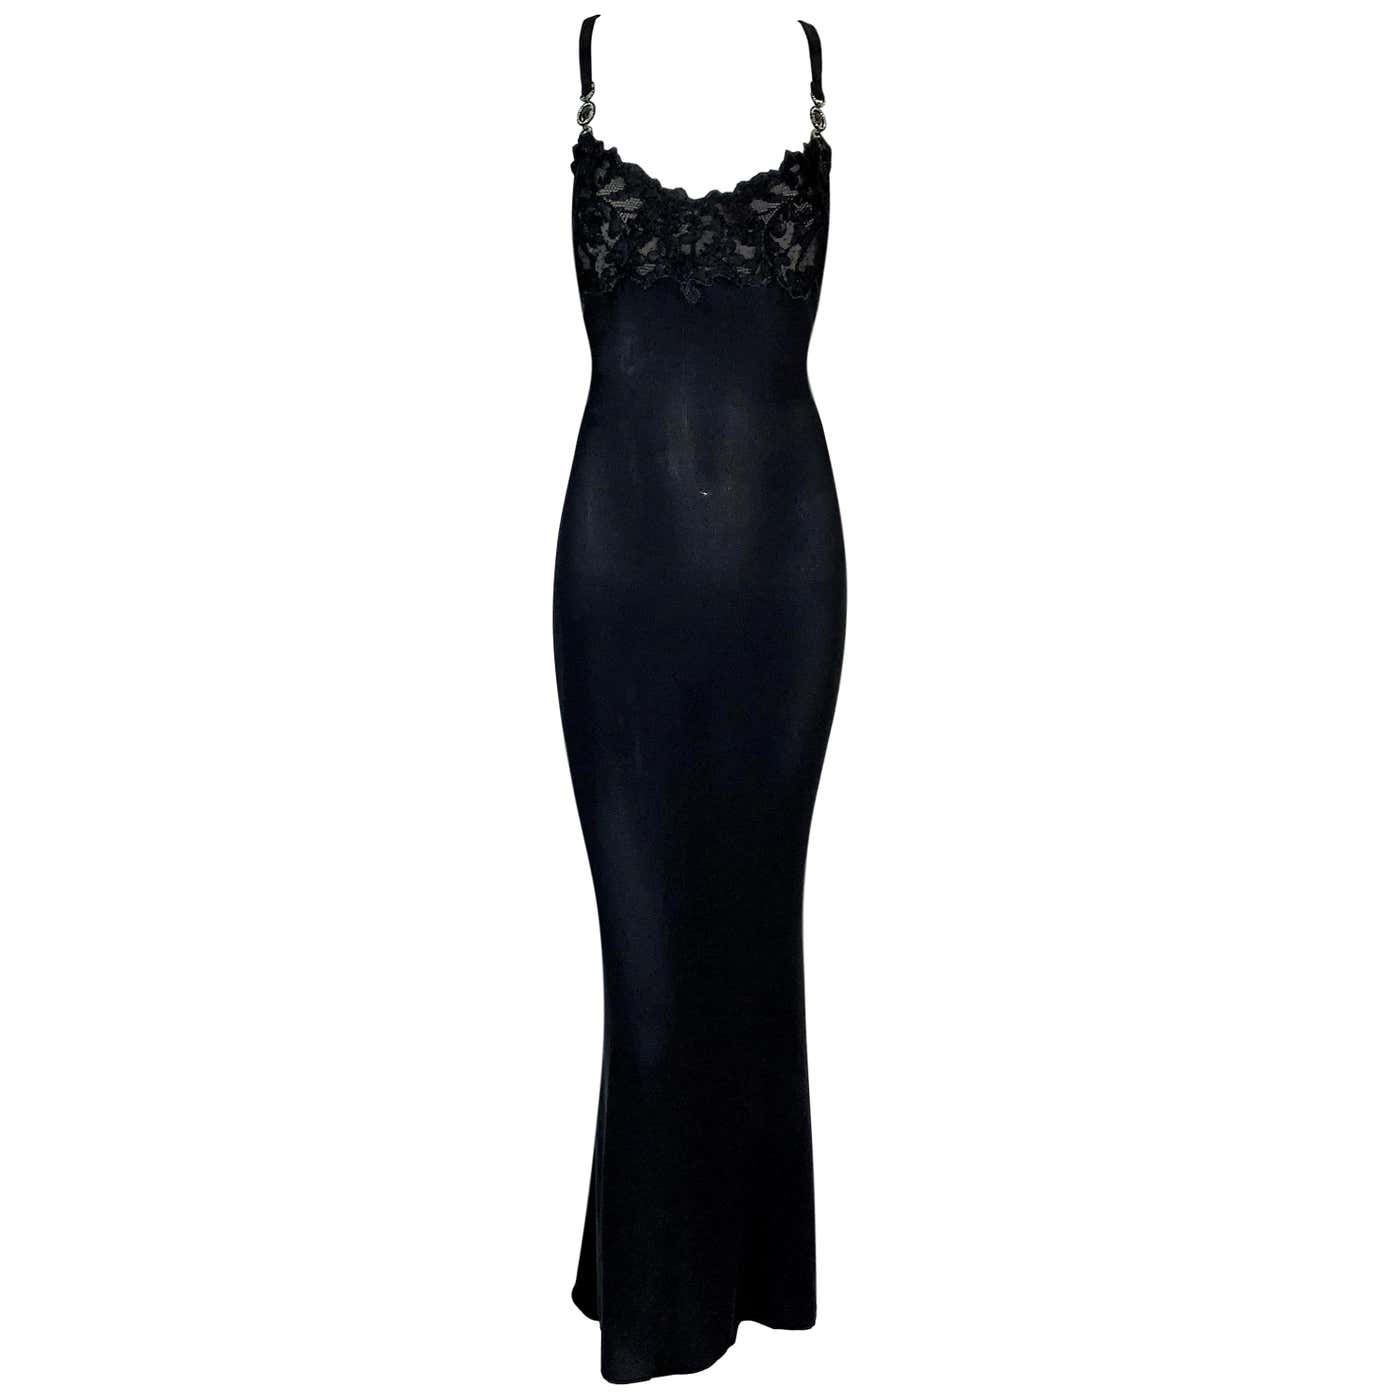 F/W 1996 Gianni Versace Semi-Sheer Black Lace Chest Gown Dress at ...